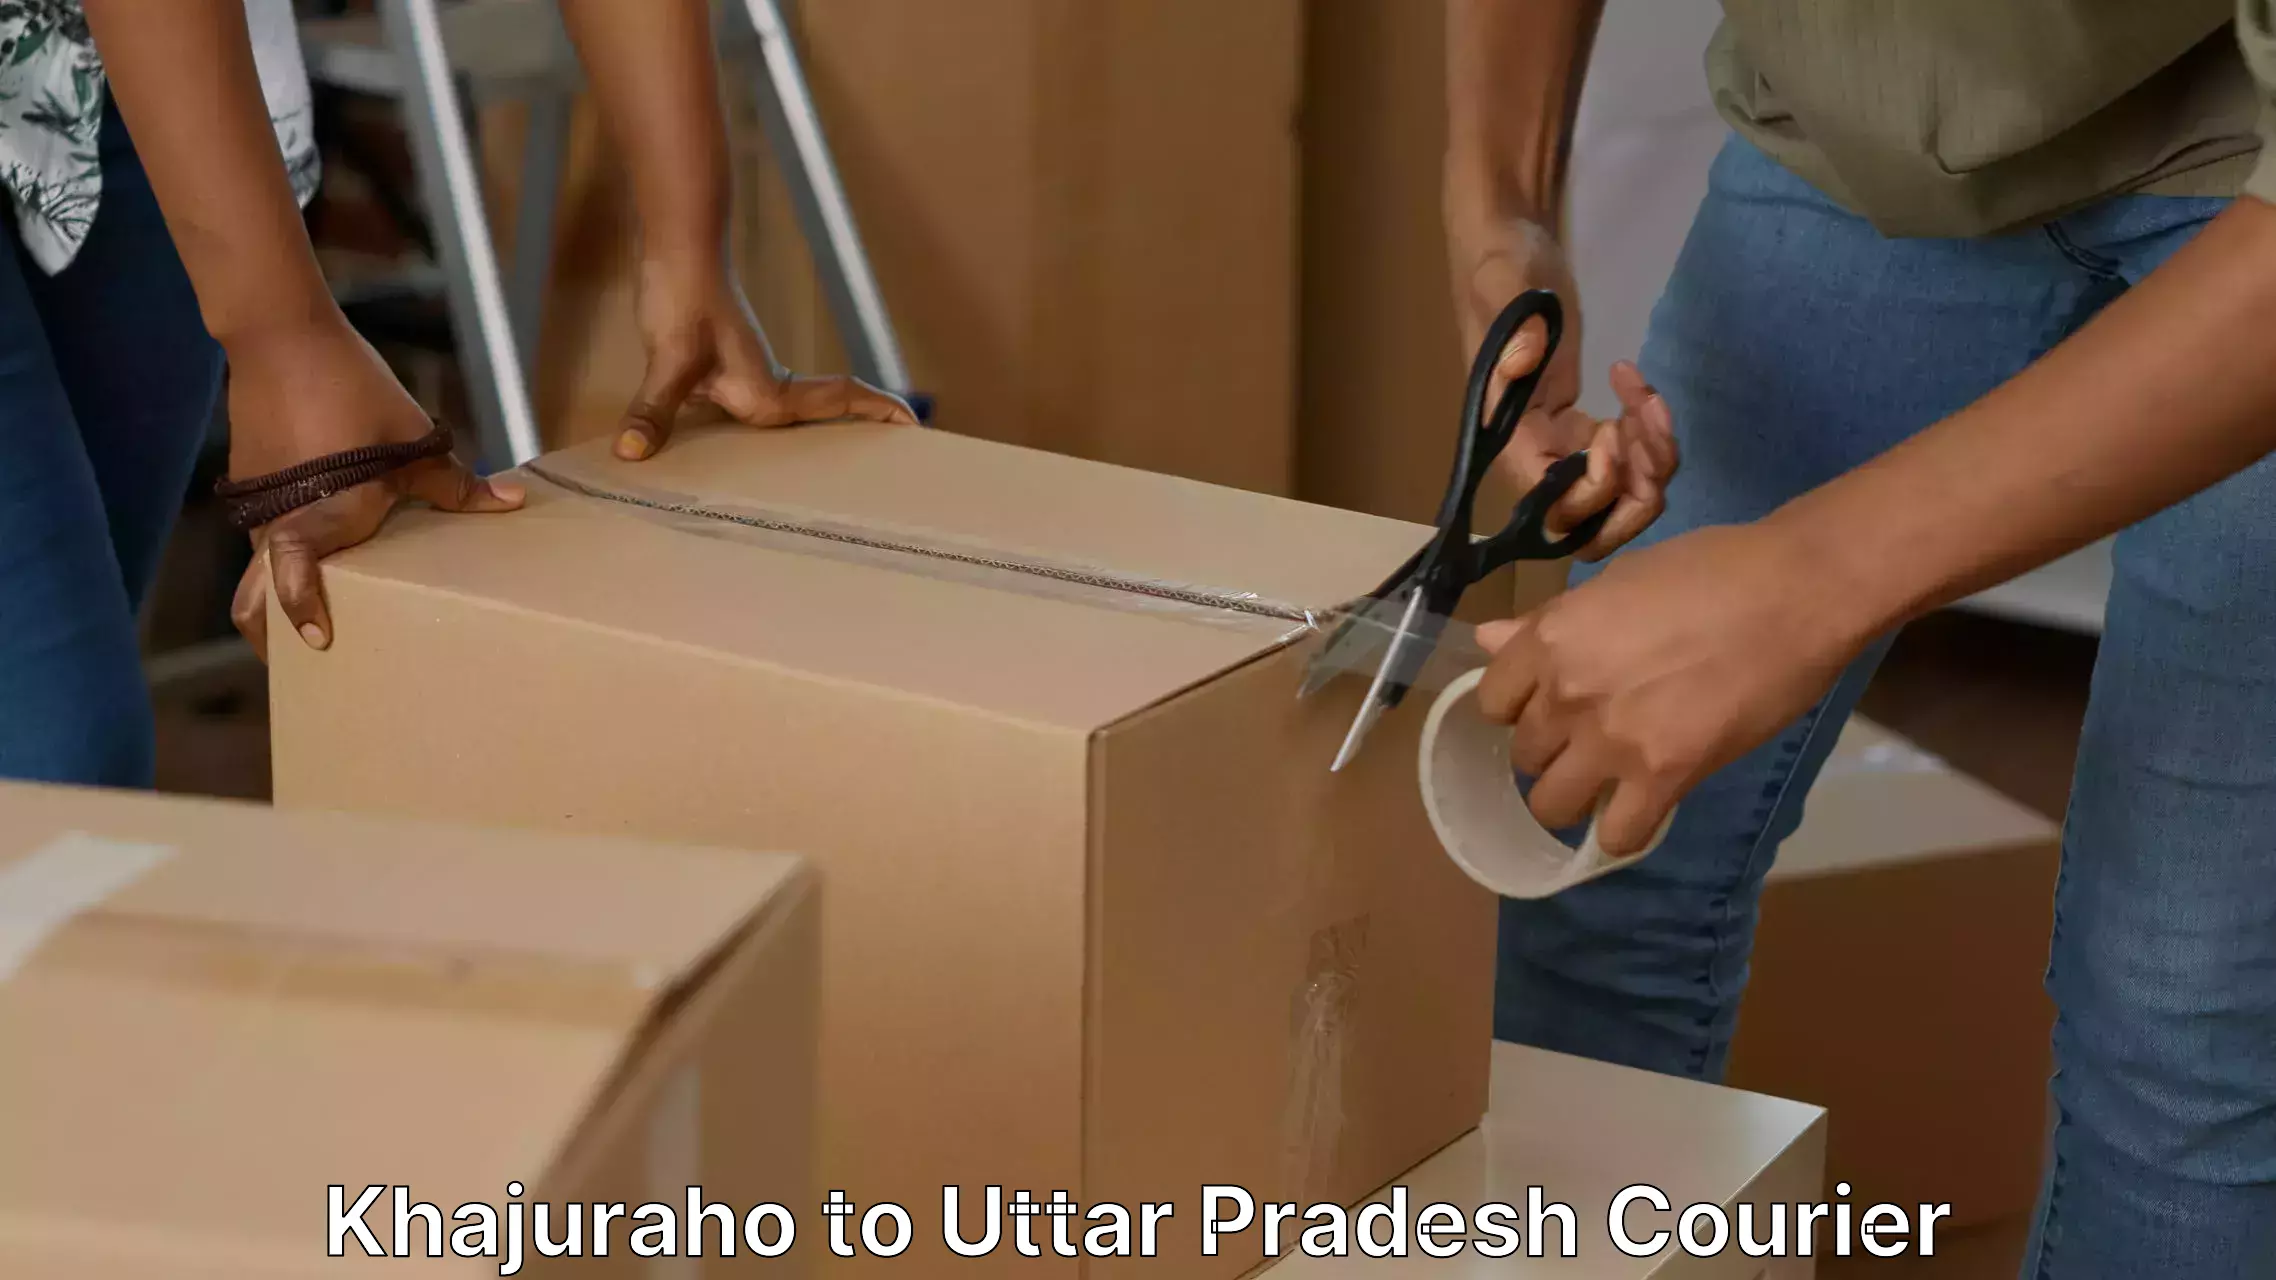 Furniture delivery service Khajuraho to Lucknow